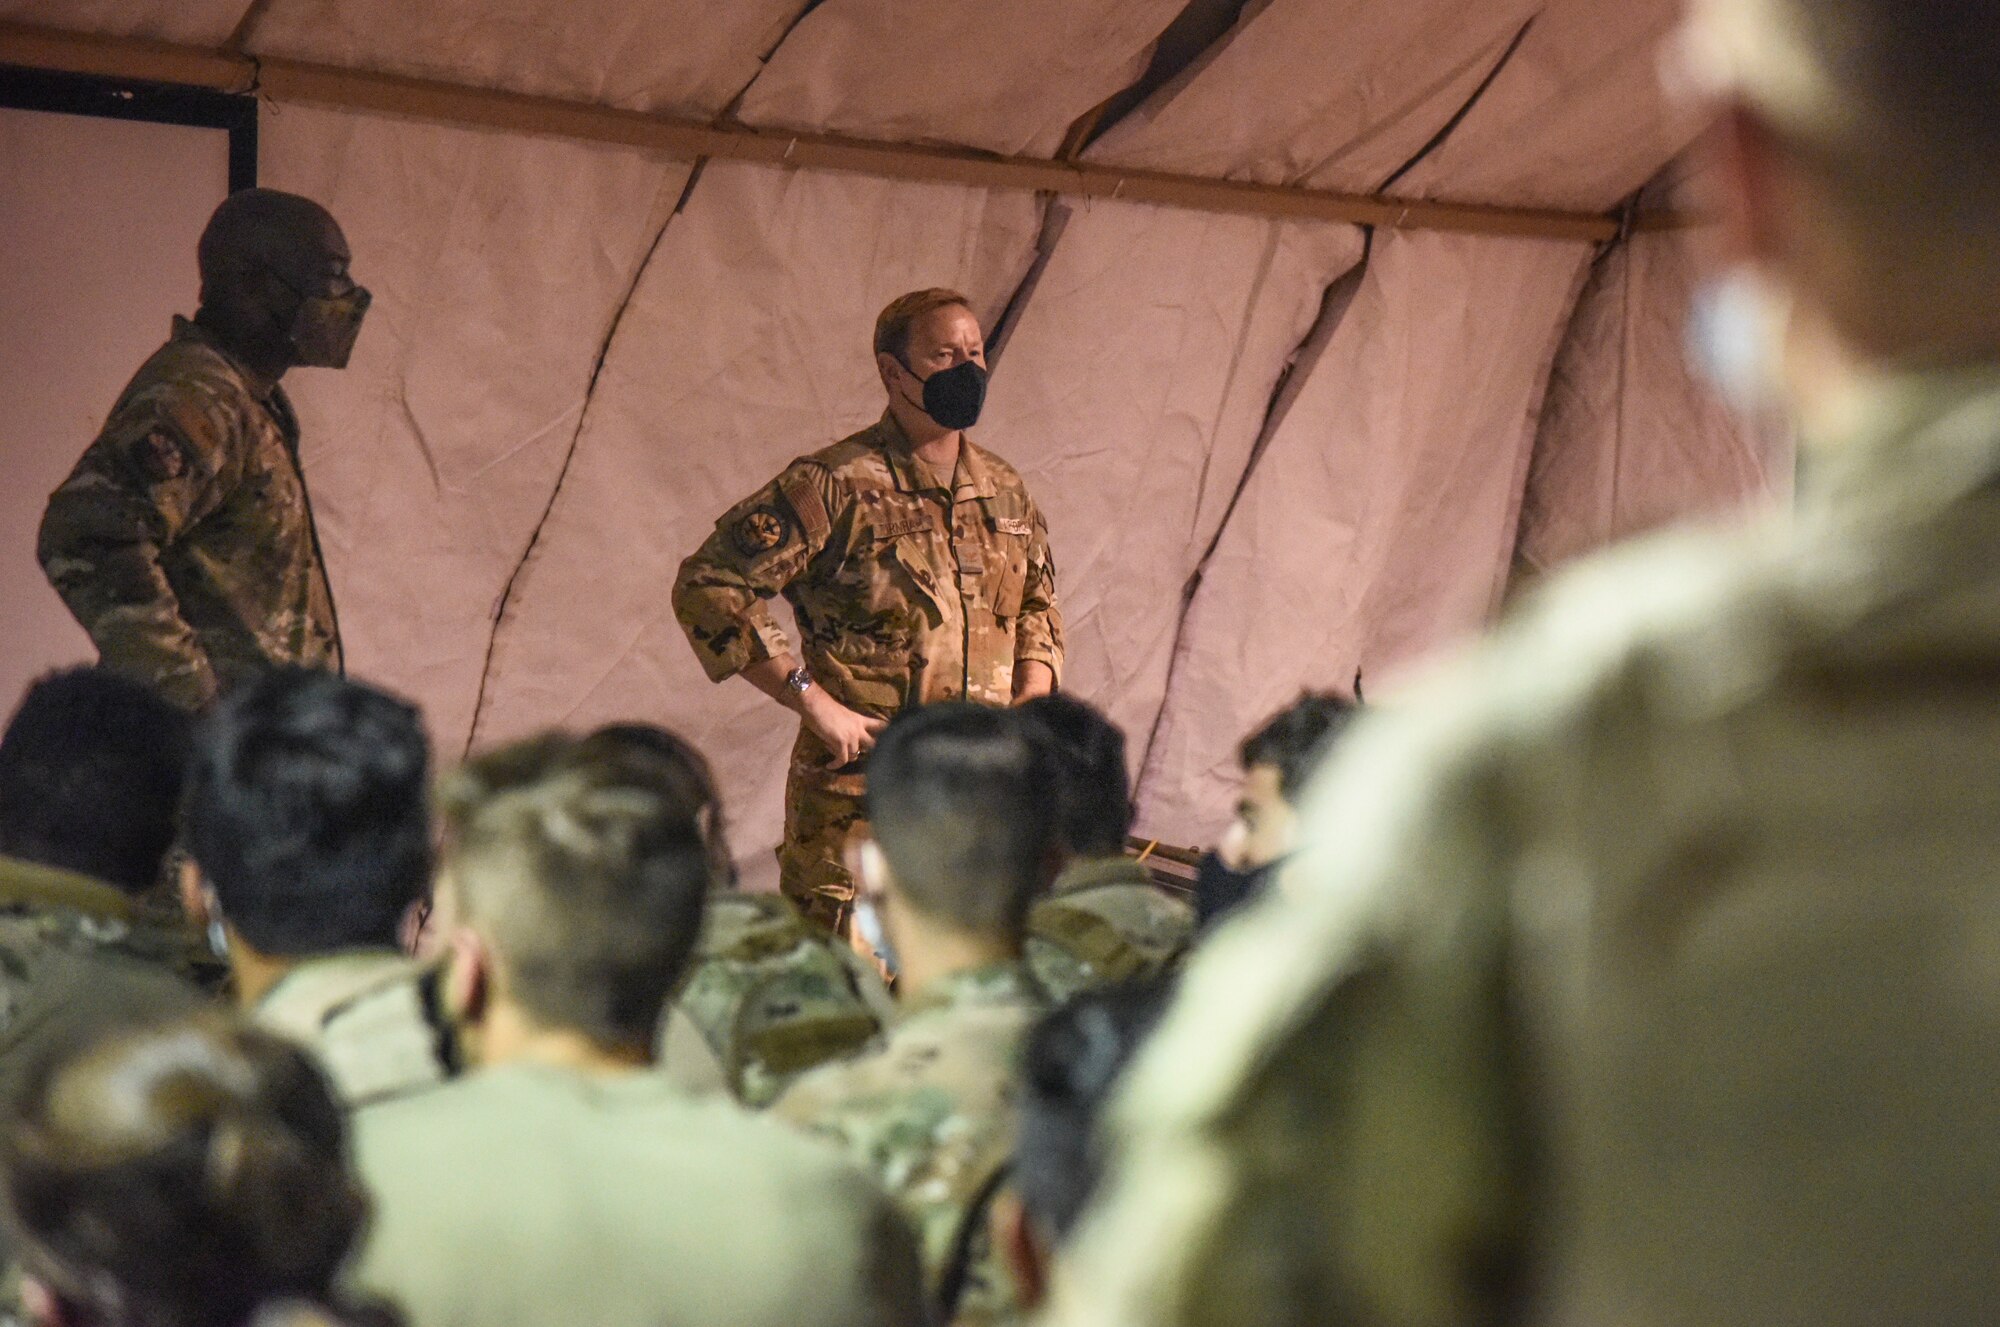 Pictured above are two Airmen speaking to a large group of Airmen.